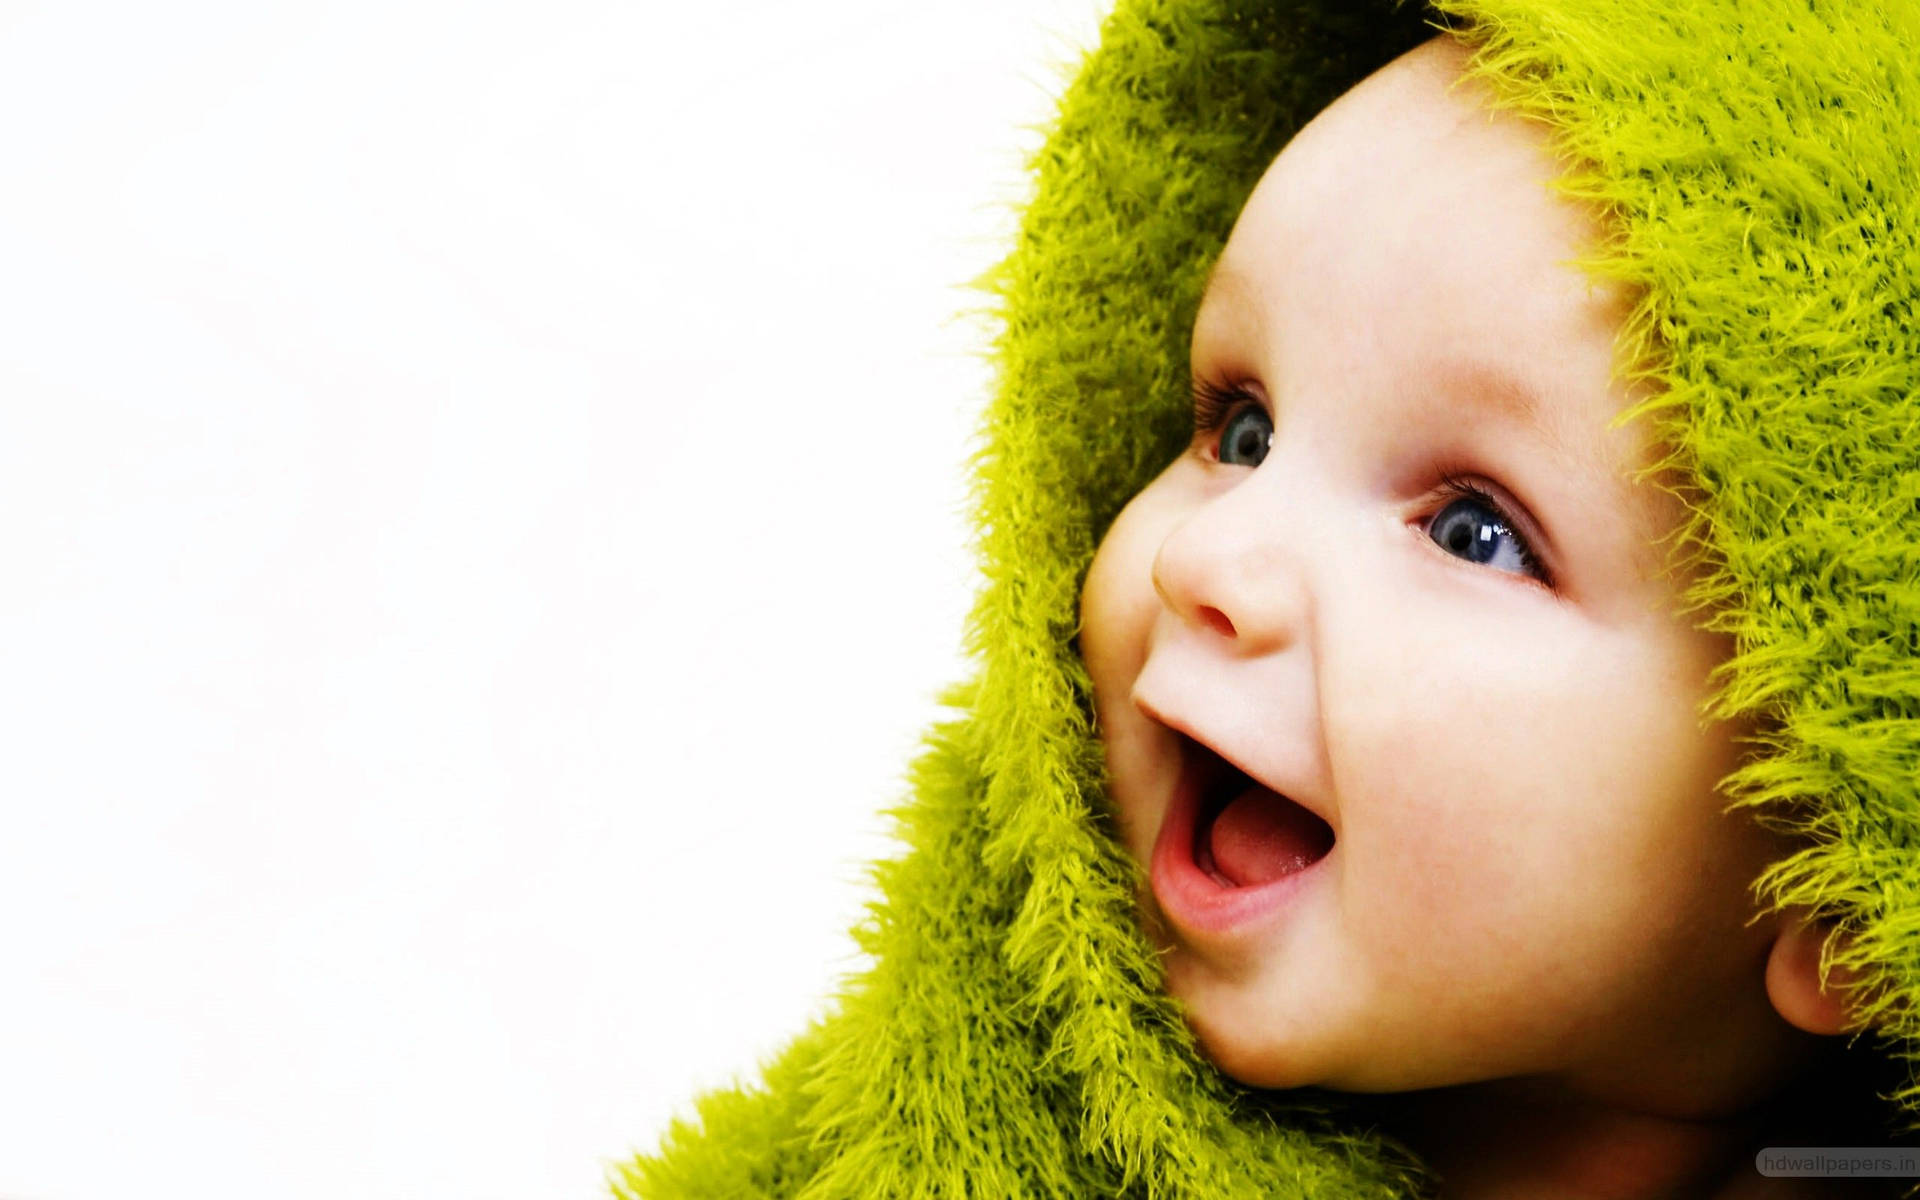 Free Funny Baby Wallpaper Downloads, [100+] Funny Baby Wallpapers for FREE  